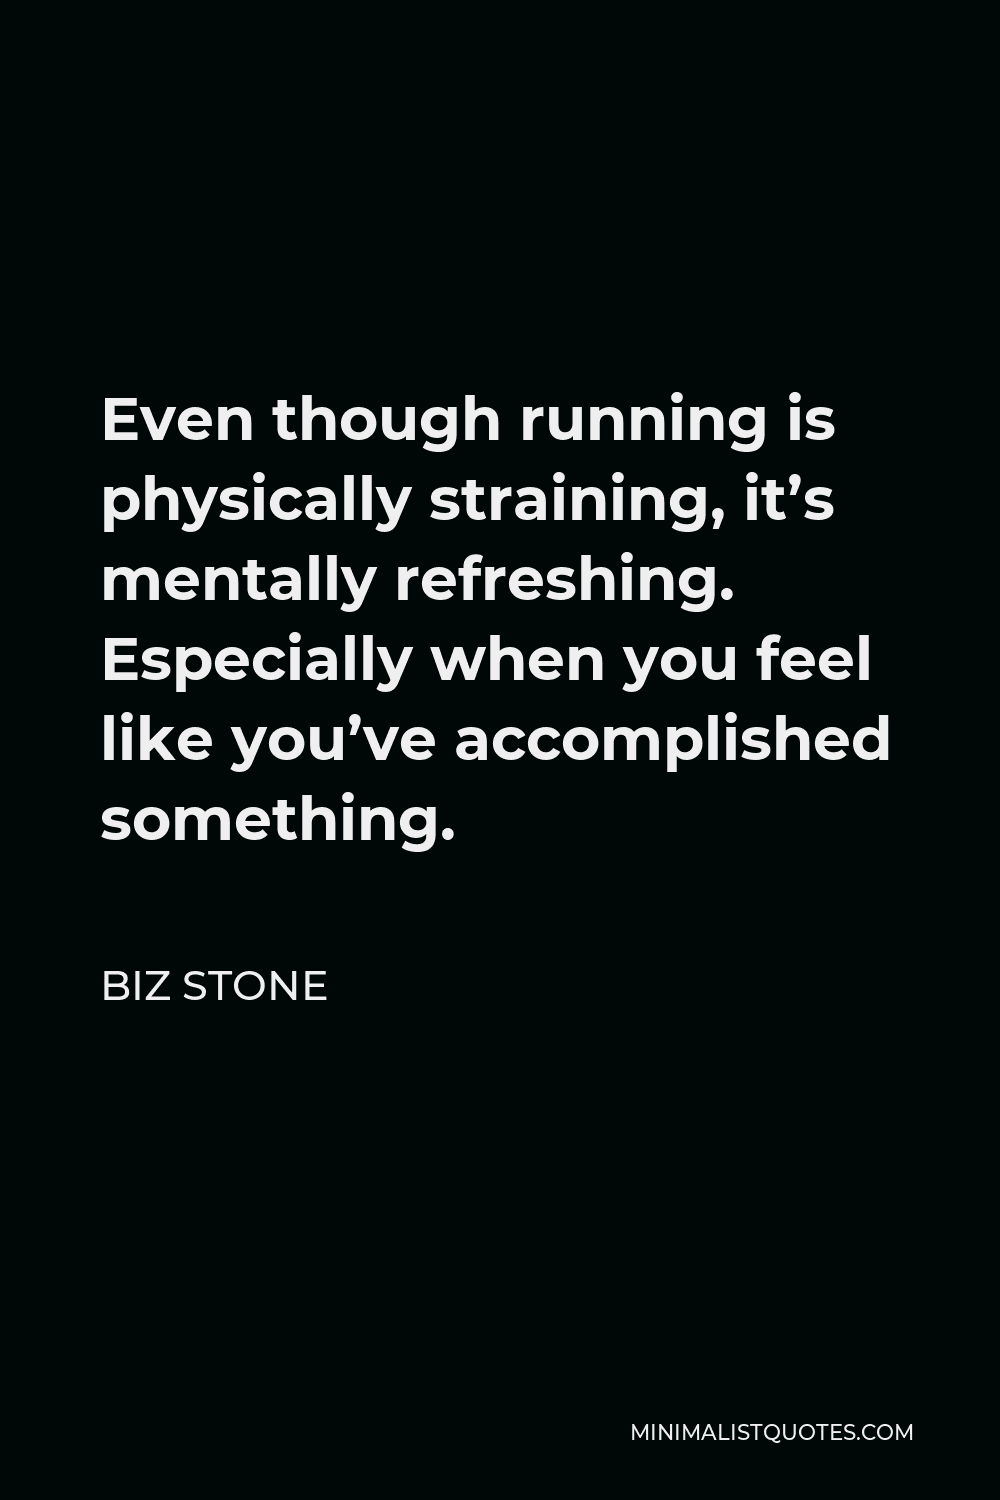 Biz Stone Quote - Even though running is physically straining, it’s mentally refreshing. Especially when you feel like you’ve accomplished something.